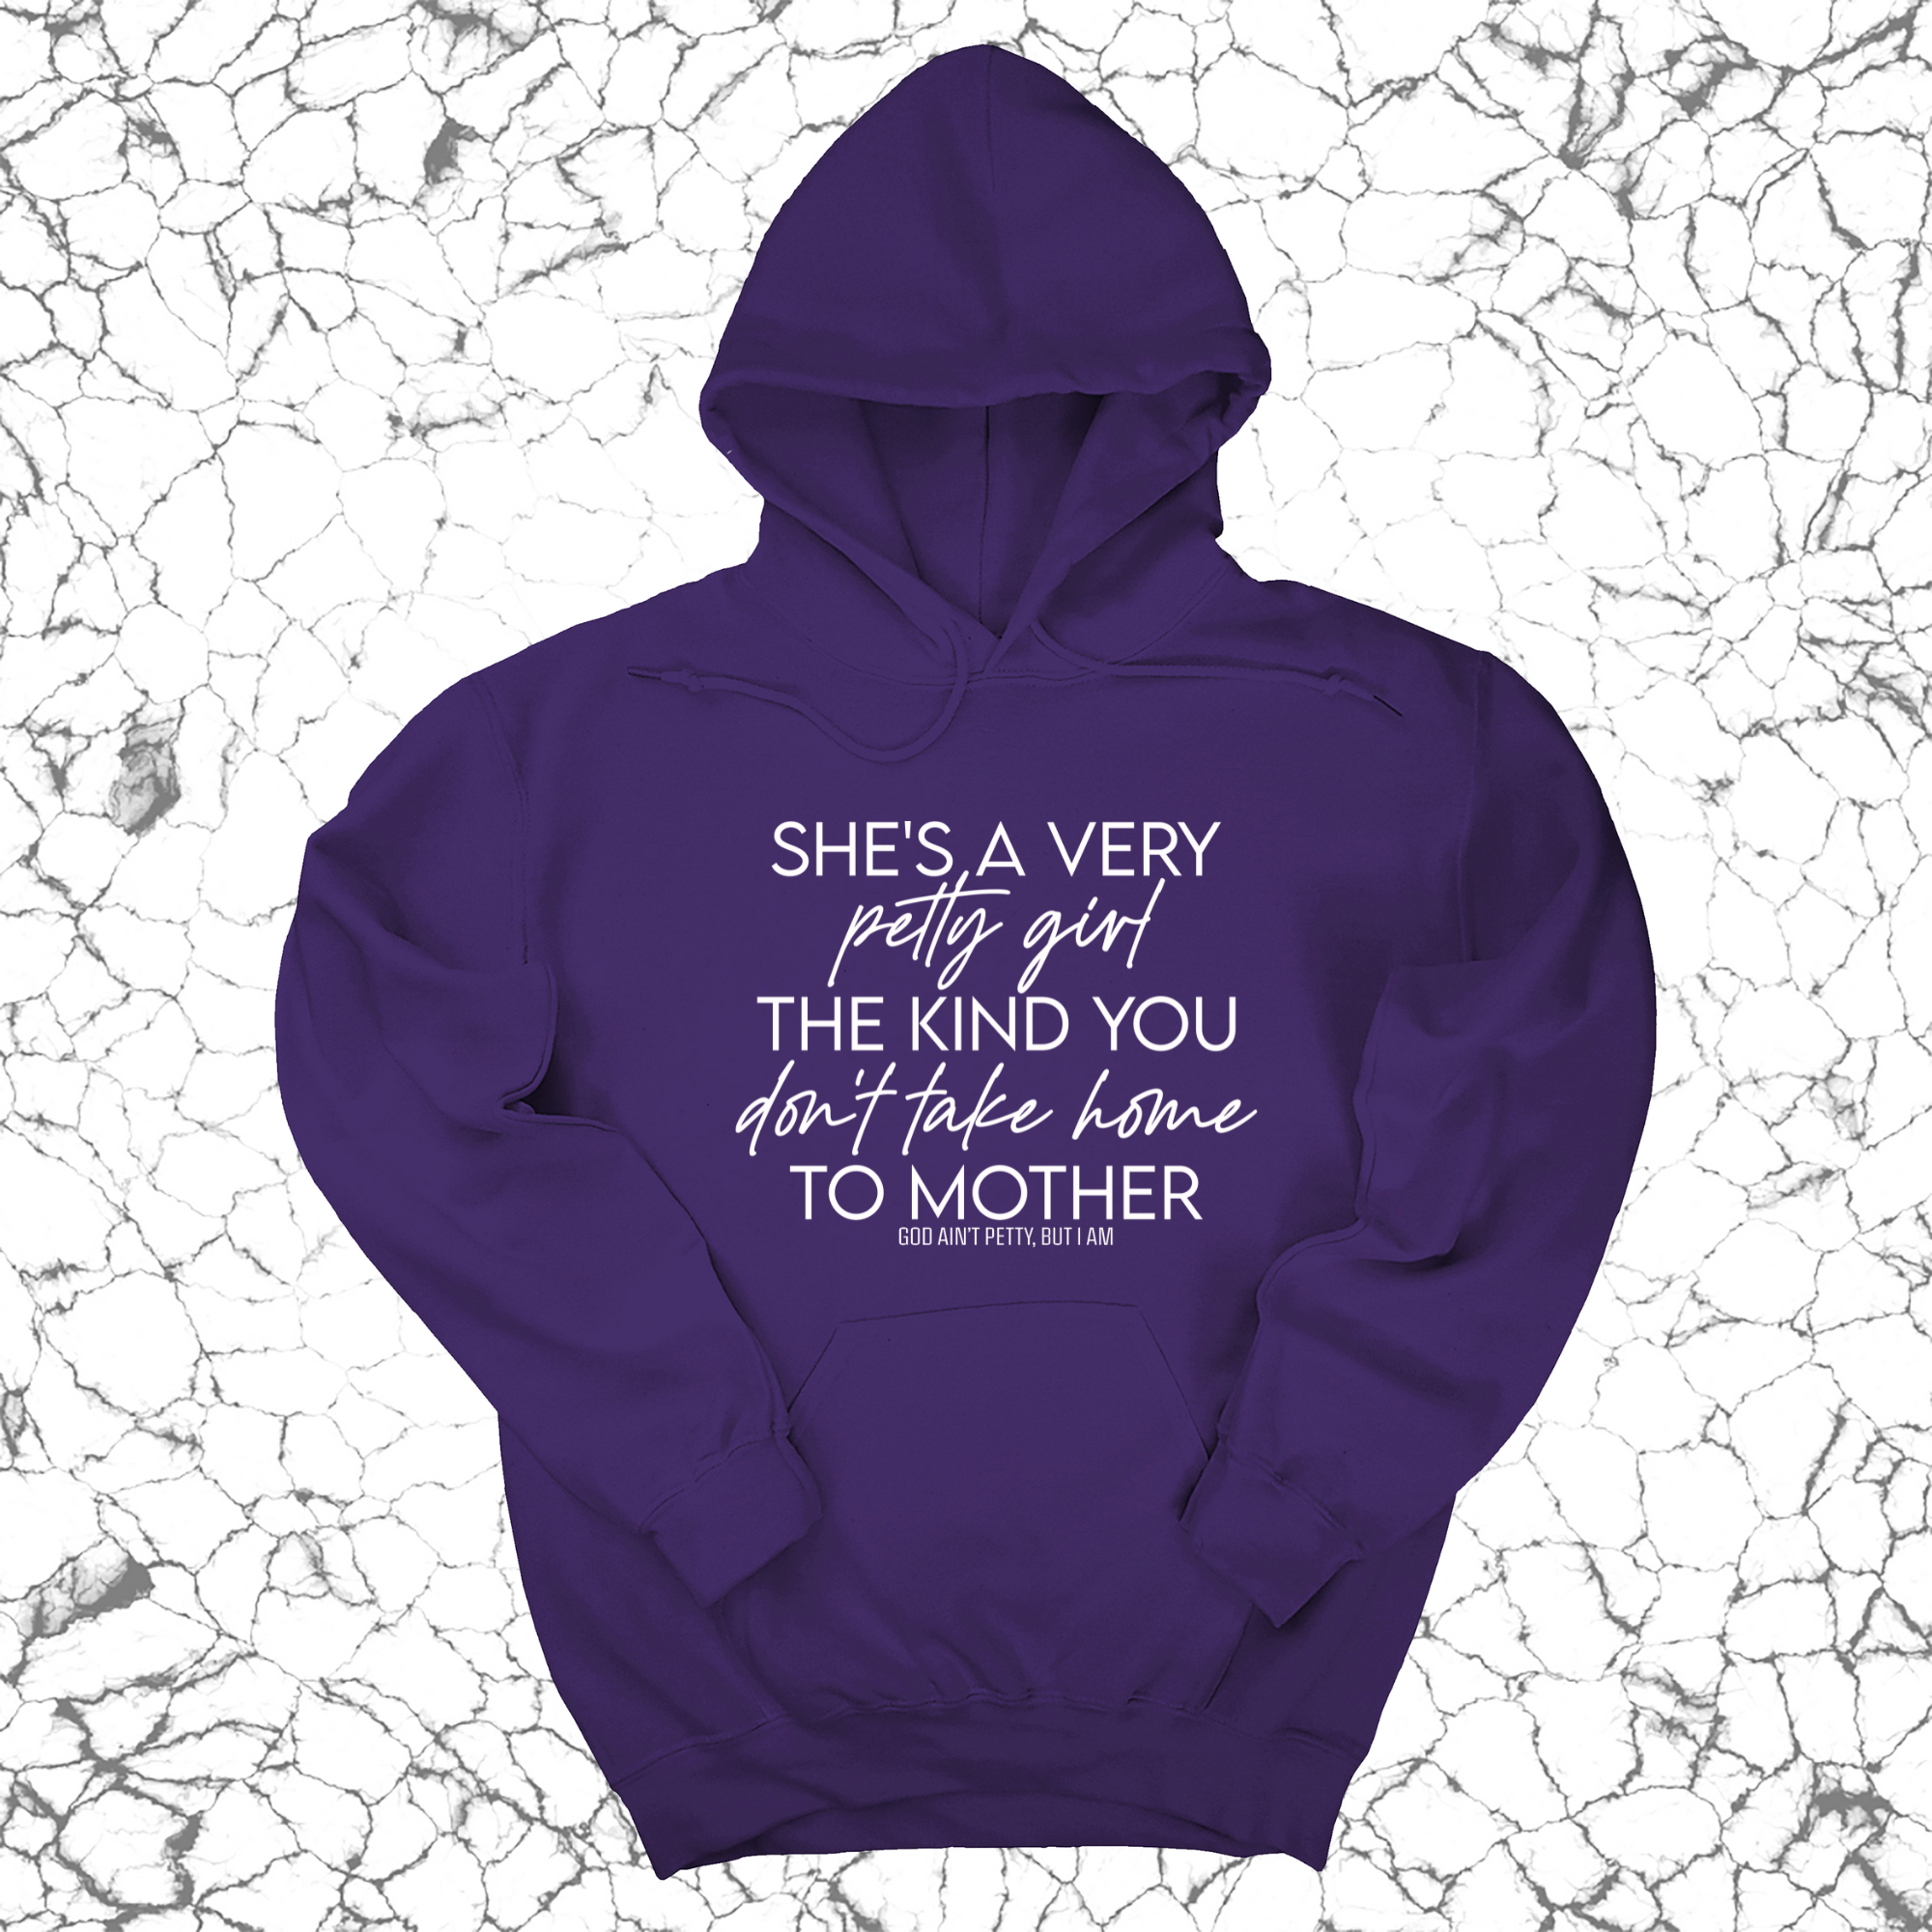 She's a very petty girl the kind you don't take home to mother Unisex Hoodie-Hoodie-The Original God Ain't Petty But I Am